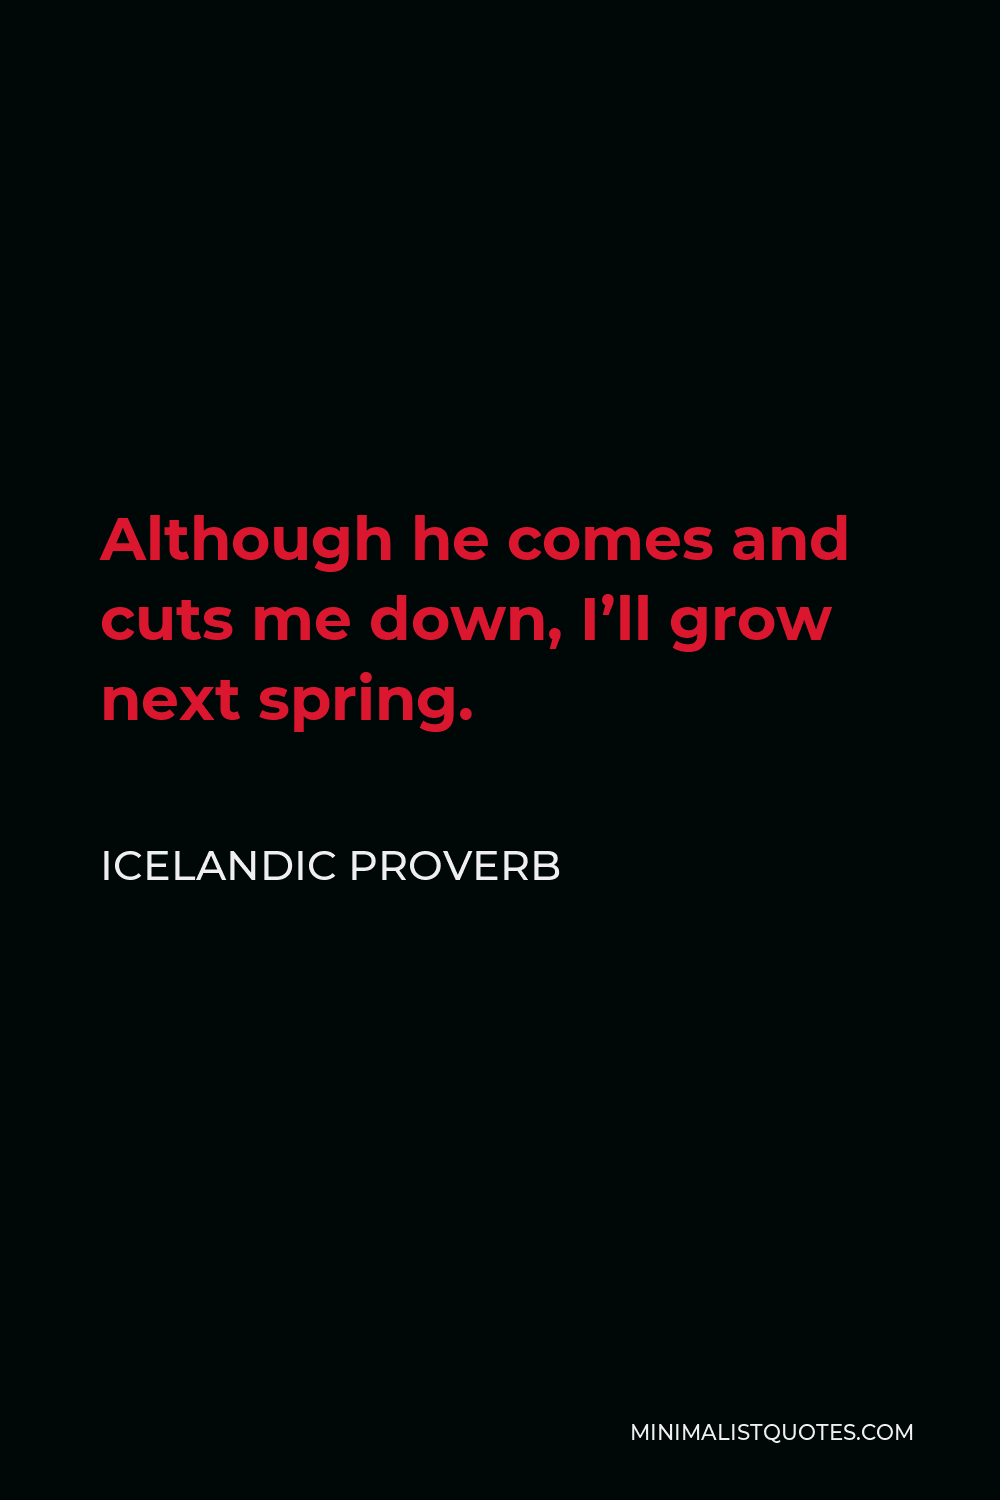 Icelandic Proverb Quote - Although he comes and cuts me down, I’ll grow next spring.